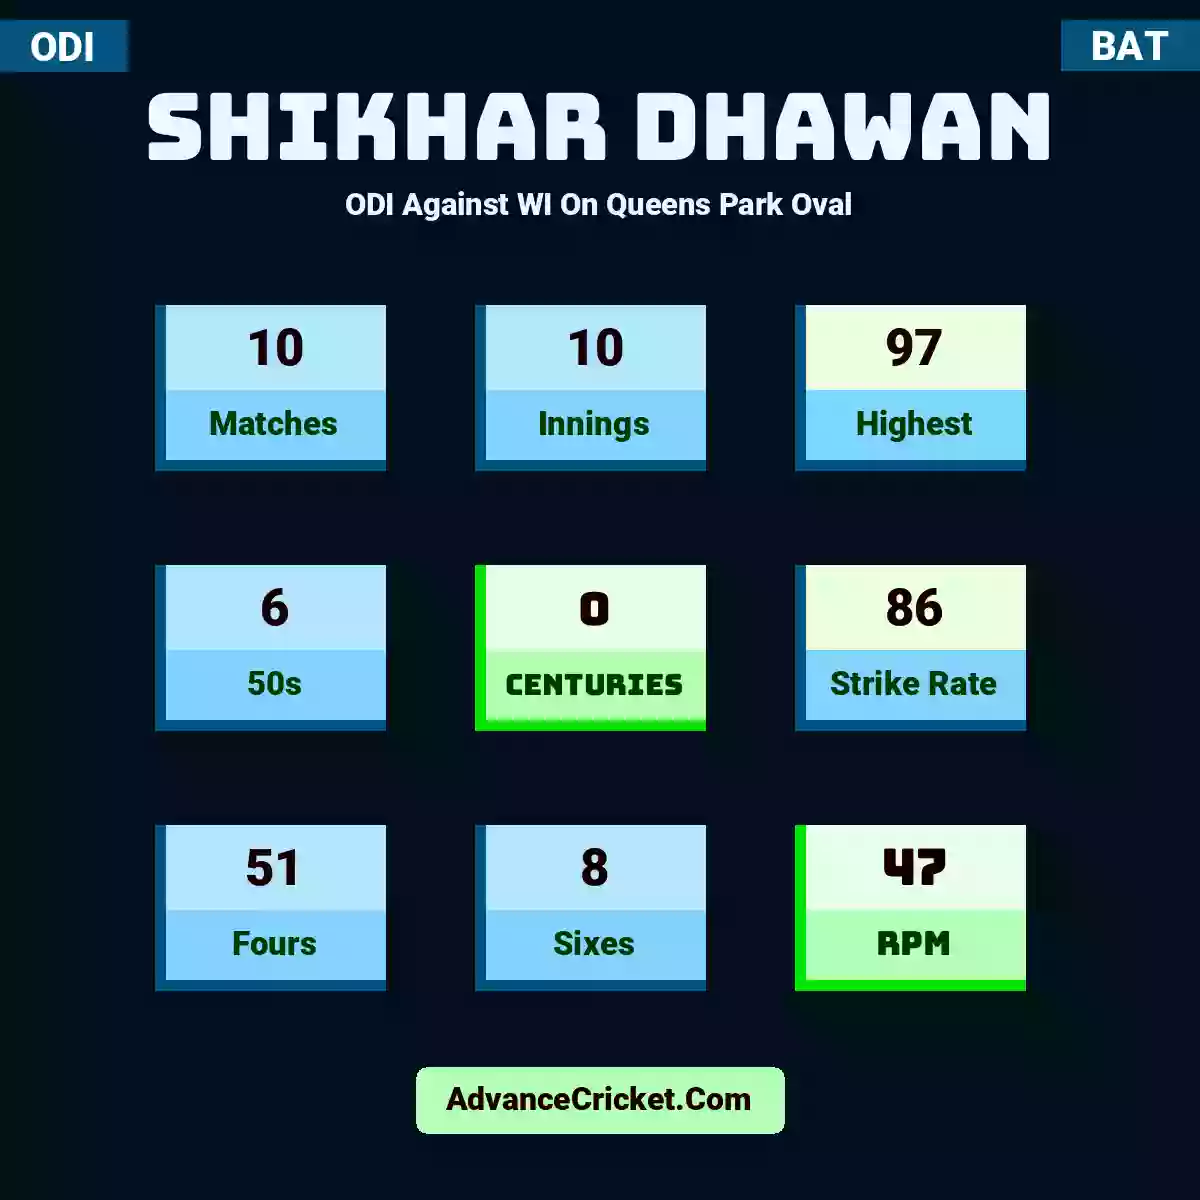 Shikhar Dhawan ODI  Against WI On Queens Park Oval, Shikhar Dhawan played 10 matches, scored 97 runs as highest, 6 half-centuries, and 0 centuries, with a strike rate of 86. S.Dhawan hit 51 fours and 8 sixes, with an RPM of 47.